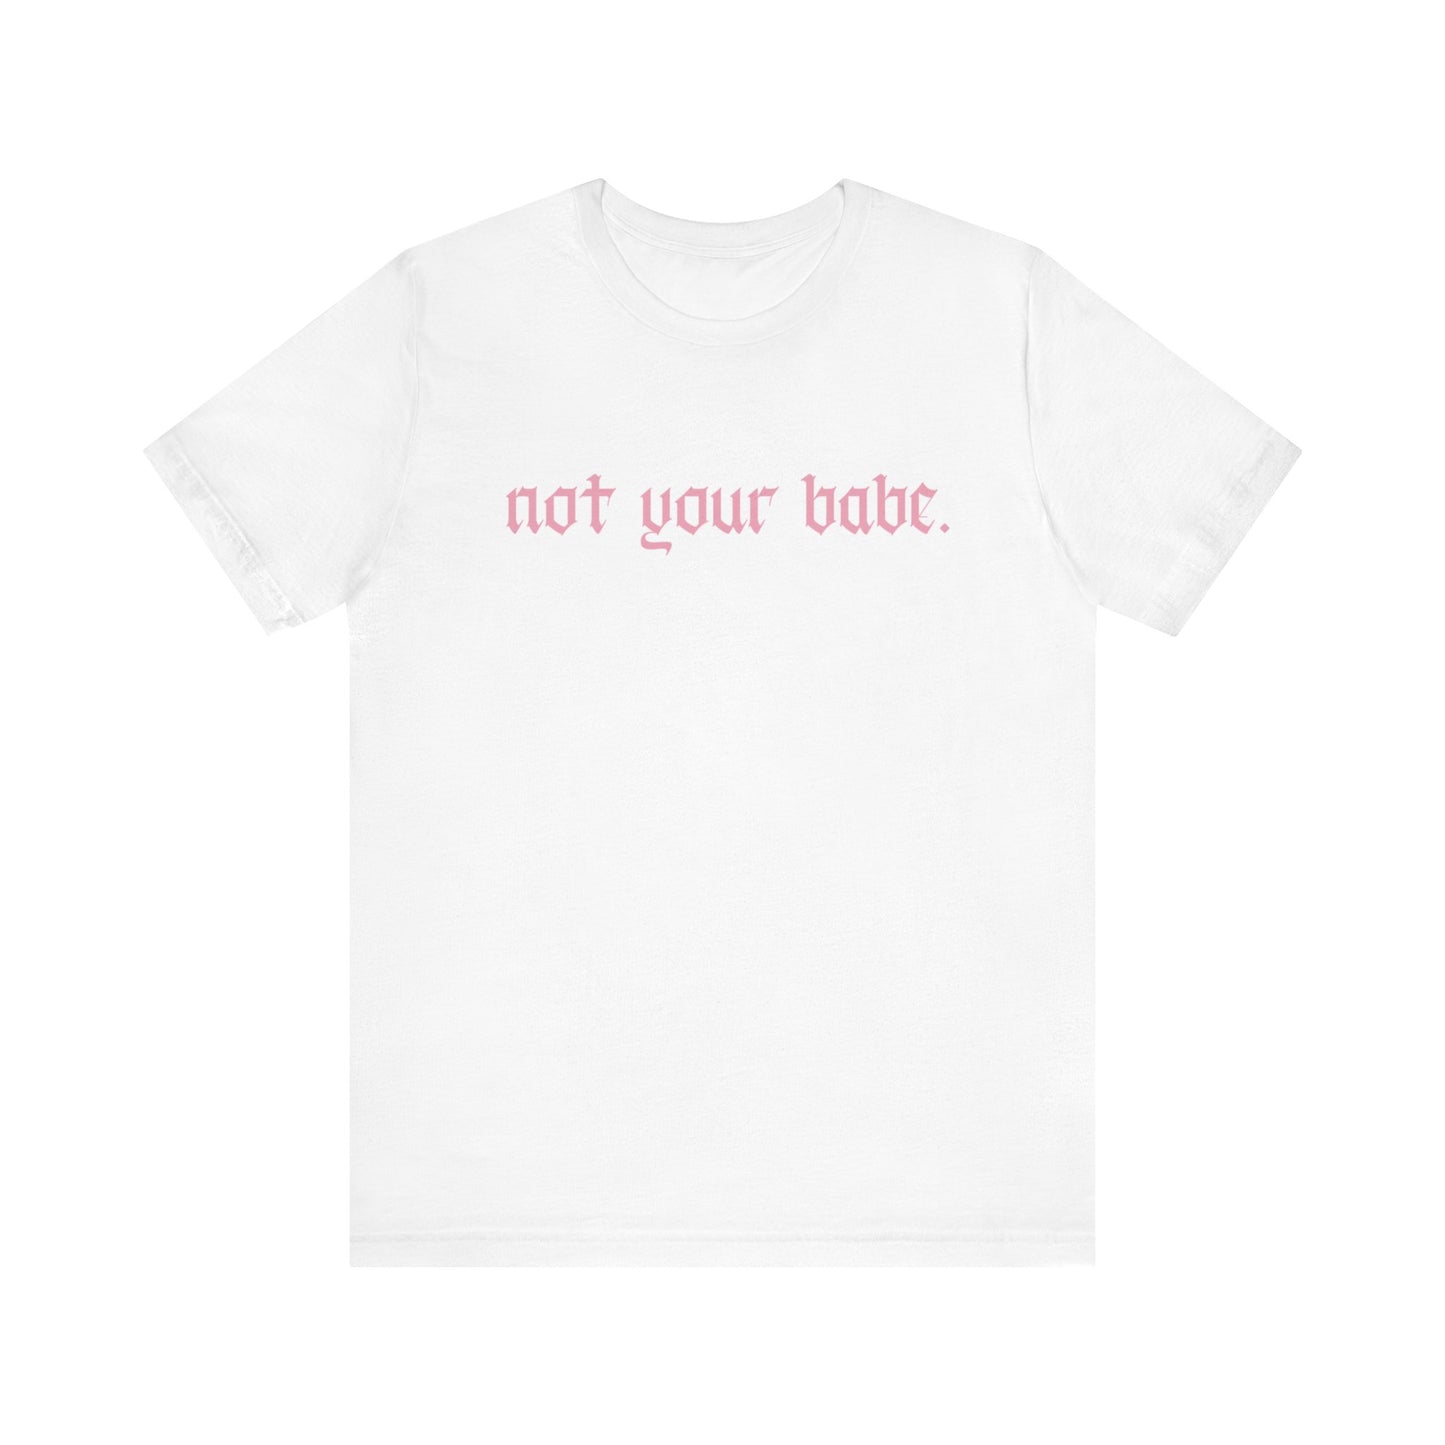 Not your babe T-shirt